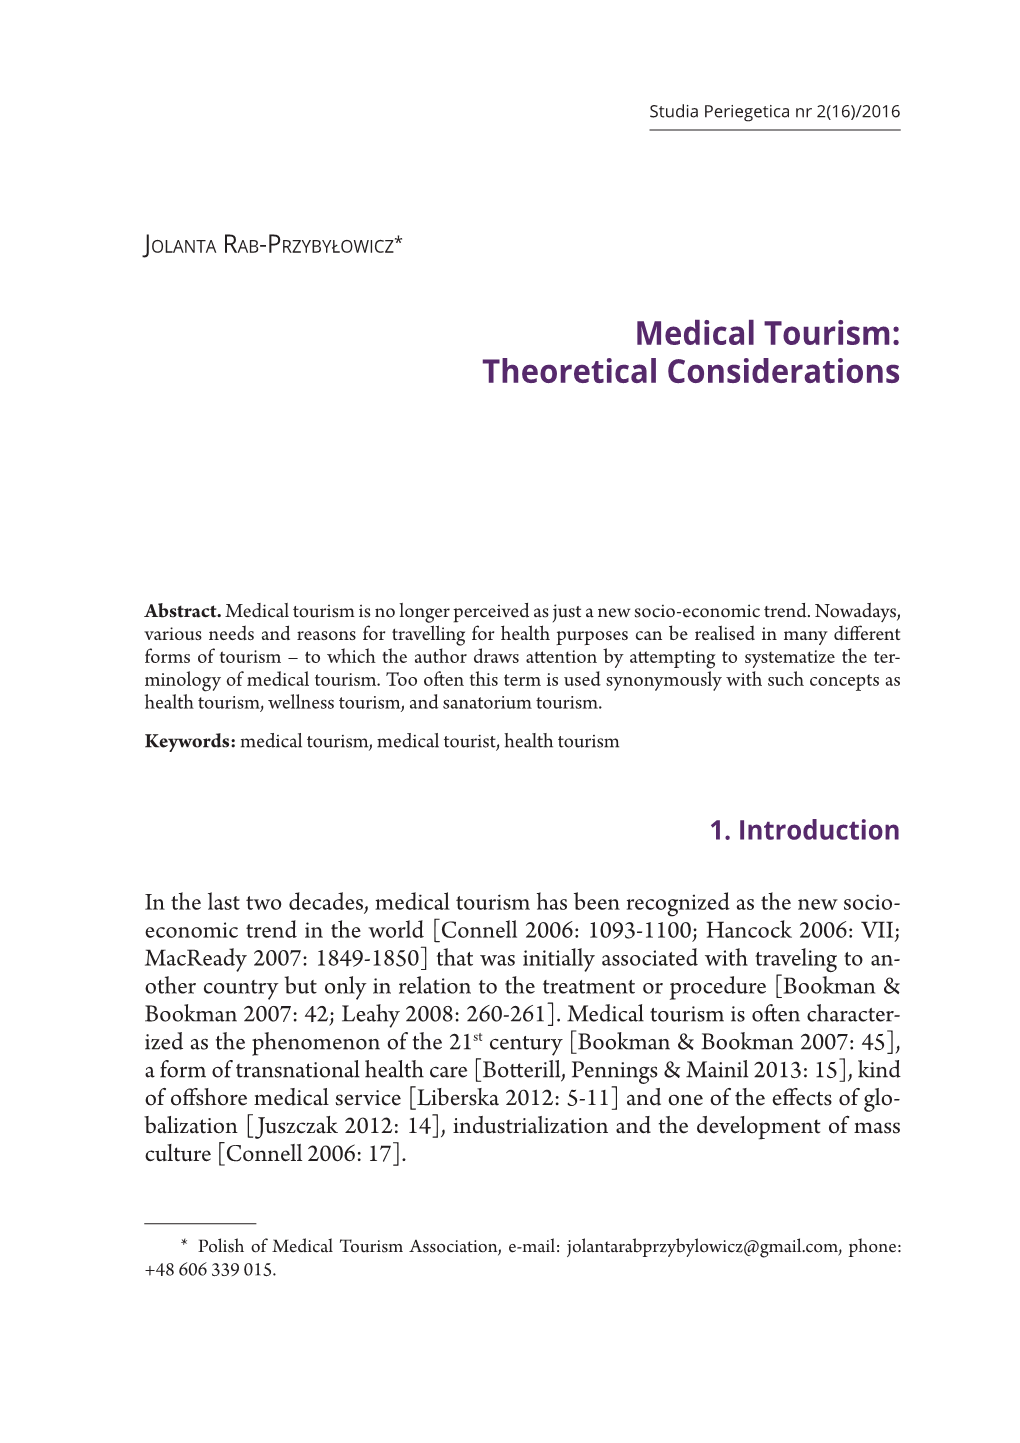 Medical Tourism: Theoretical Considerations